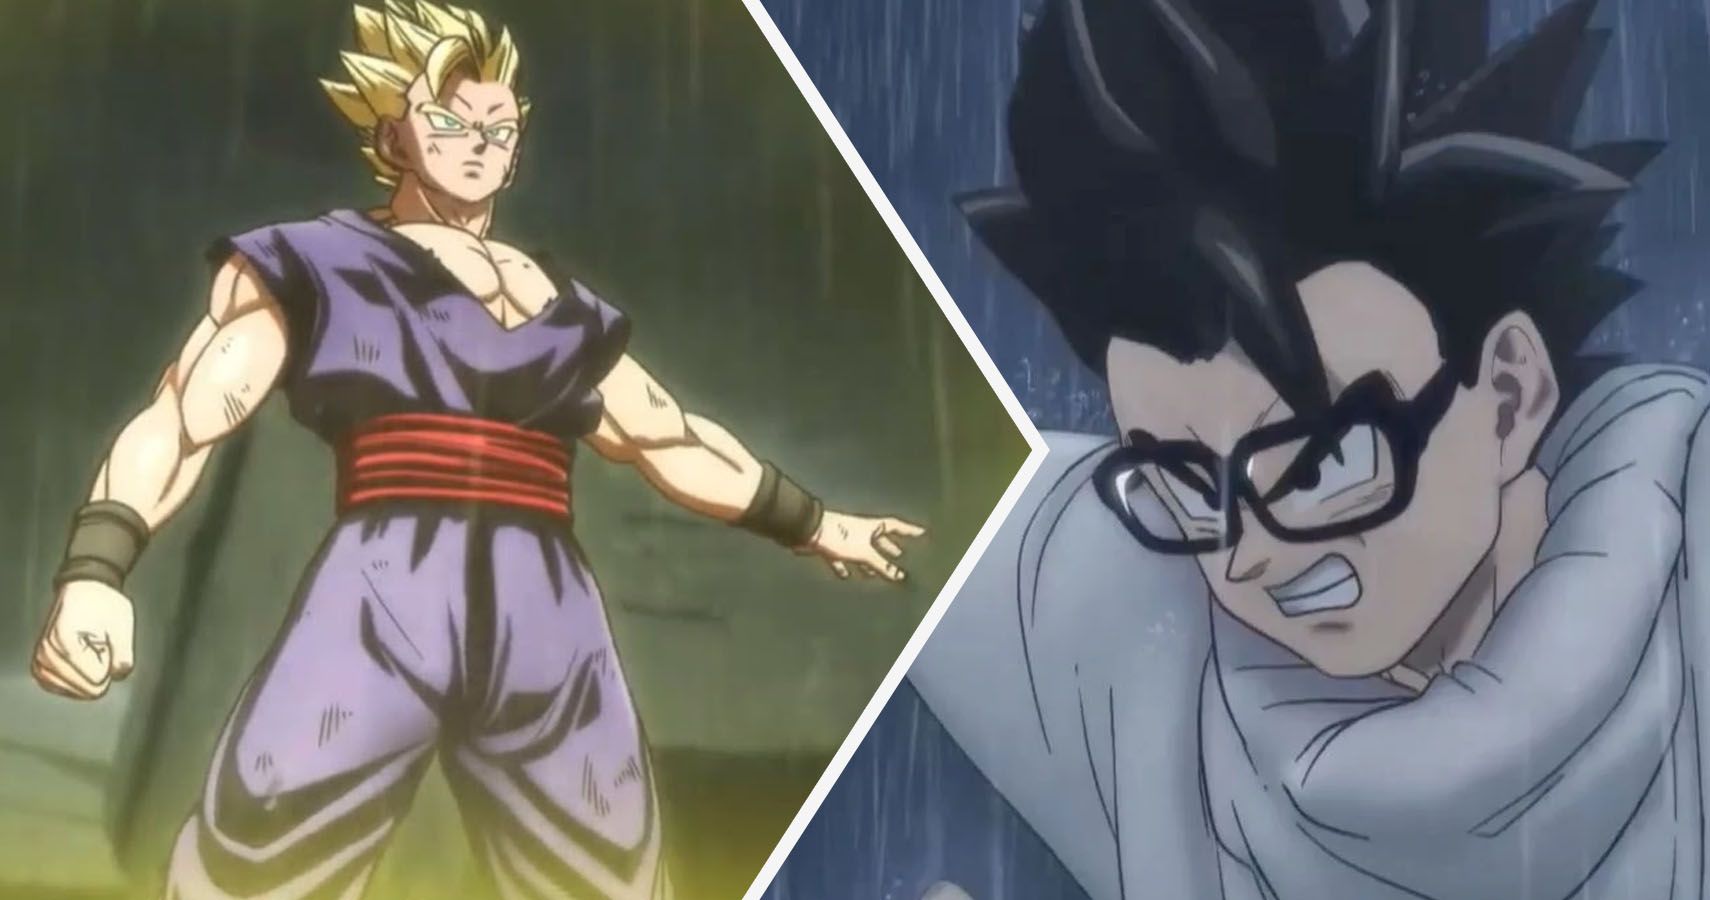 Dragon Ball Super: Super Hero: What Happened With Gohan Before?